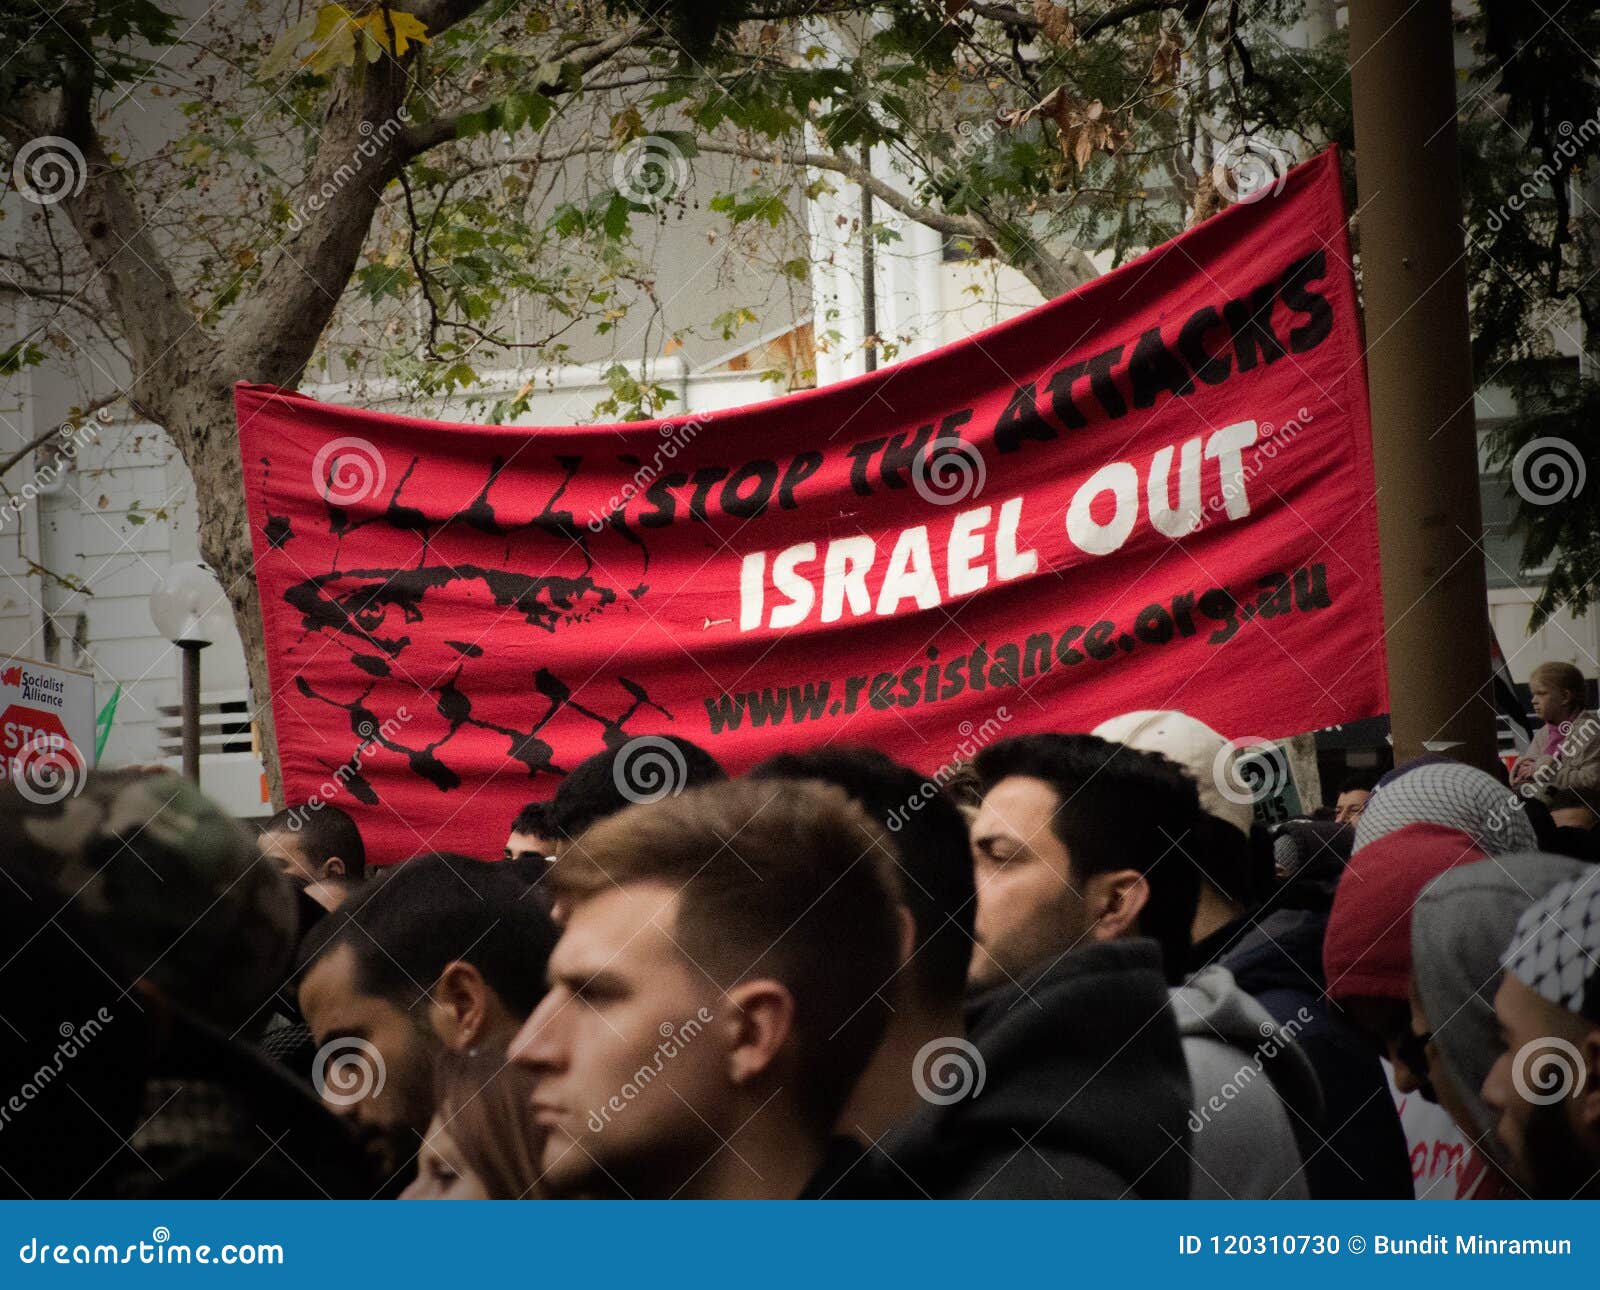 The Palestinians Protest Against Israel To Free Palestine, they Show ...